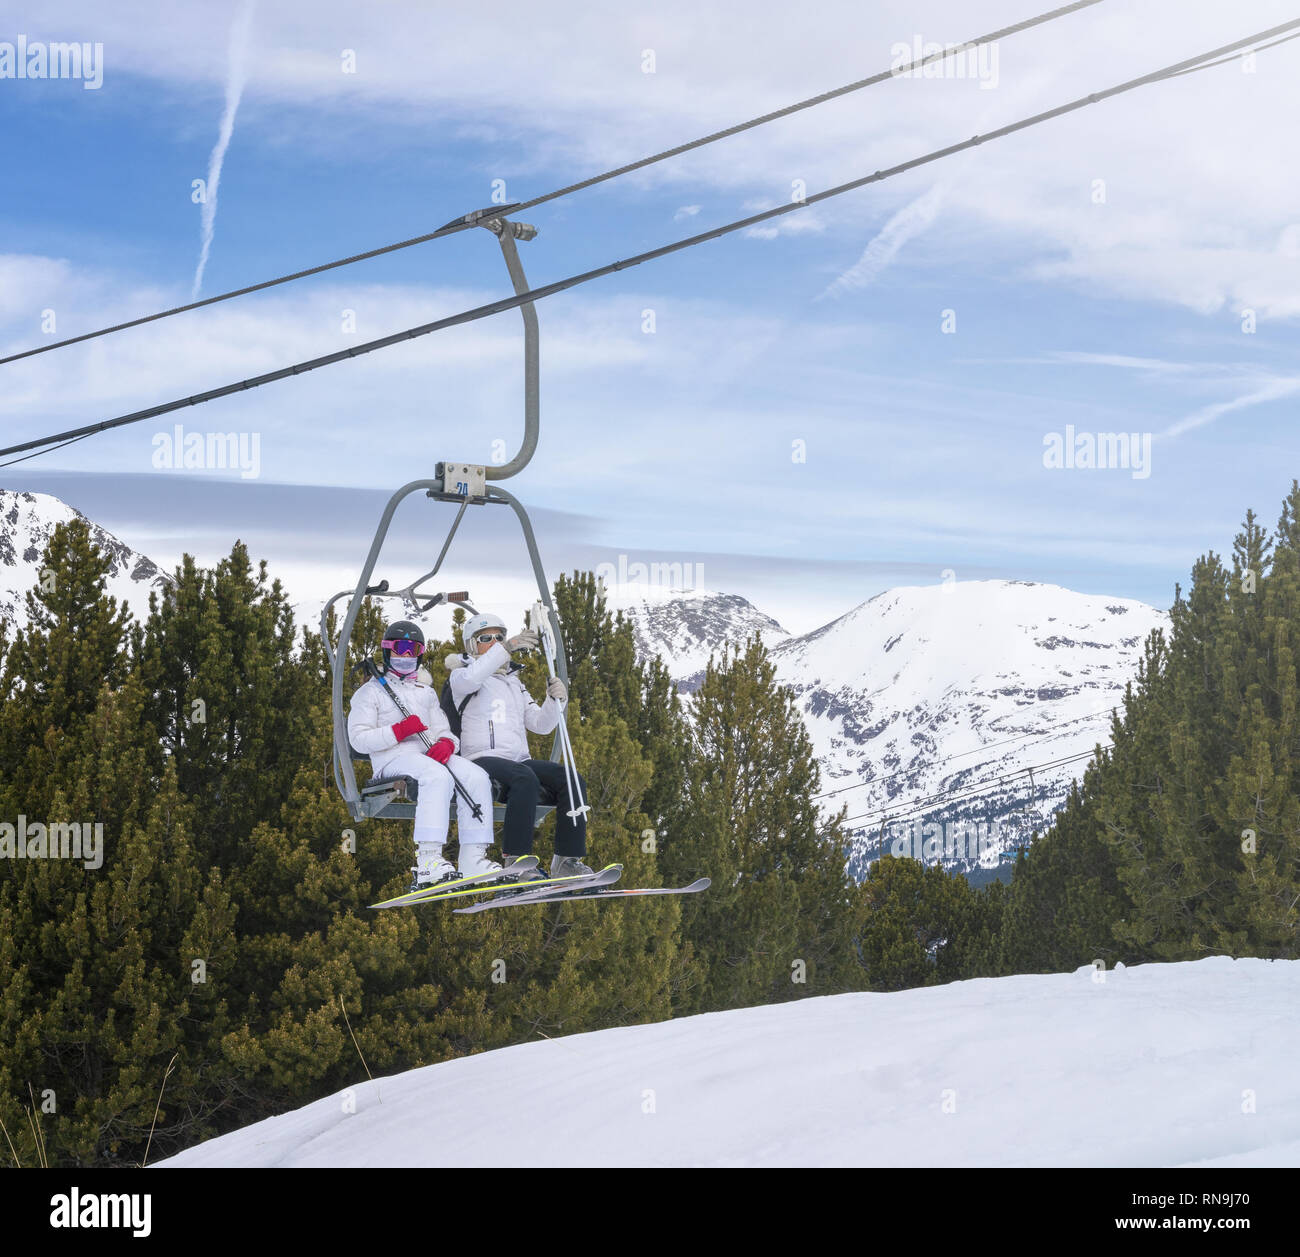 10 February 2019 - El Tarter, Andorra. Picture of skiers using the chairlift in the beautiful ski resort of El Tarter, Andorra. Stock Photo